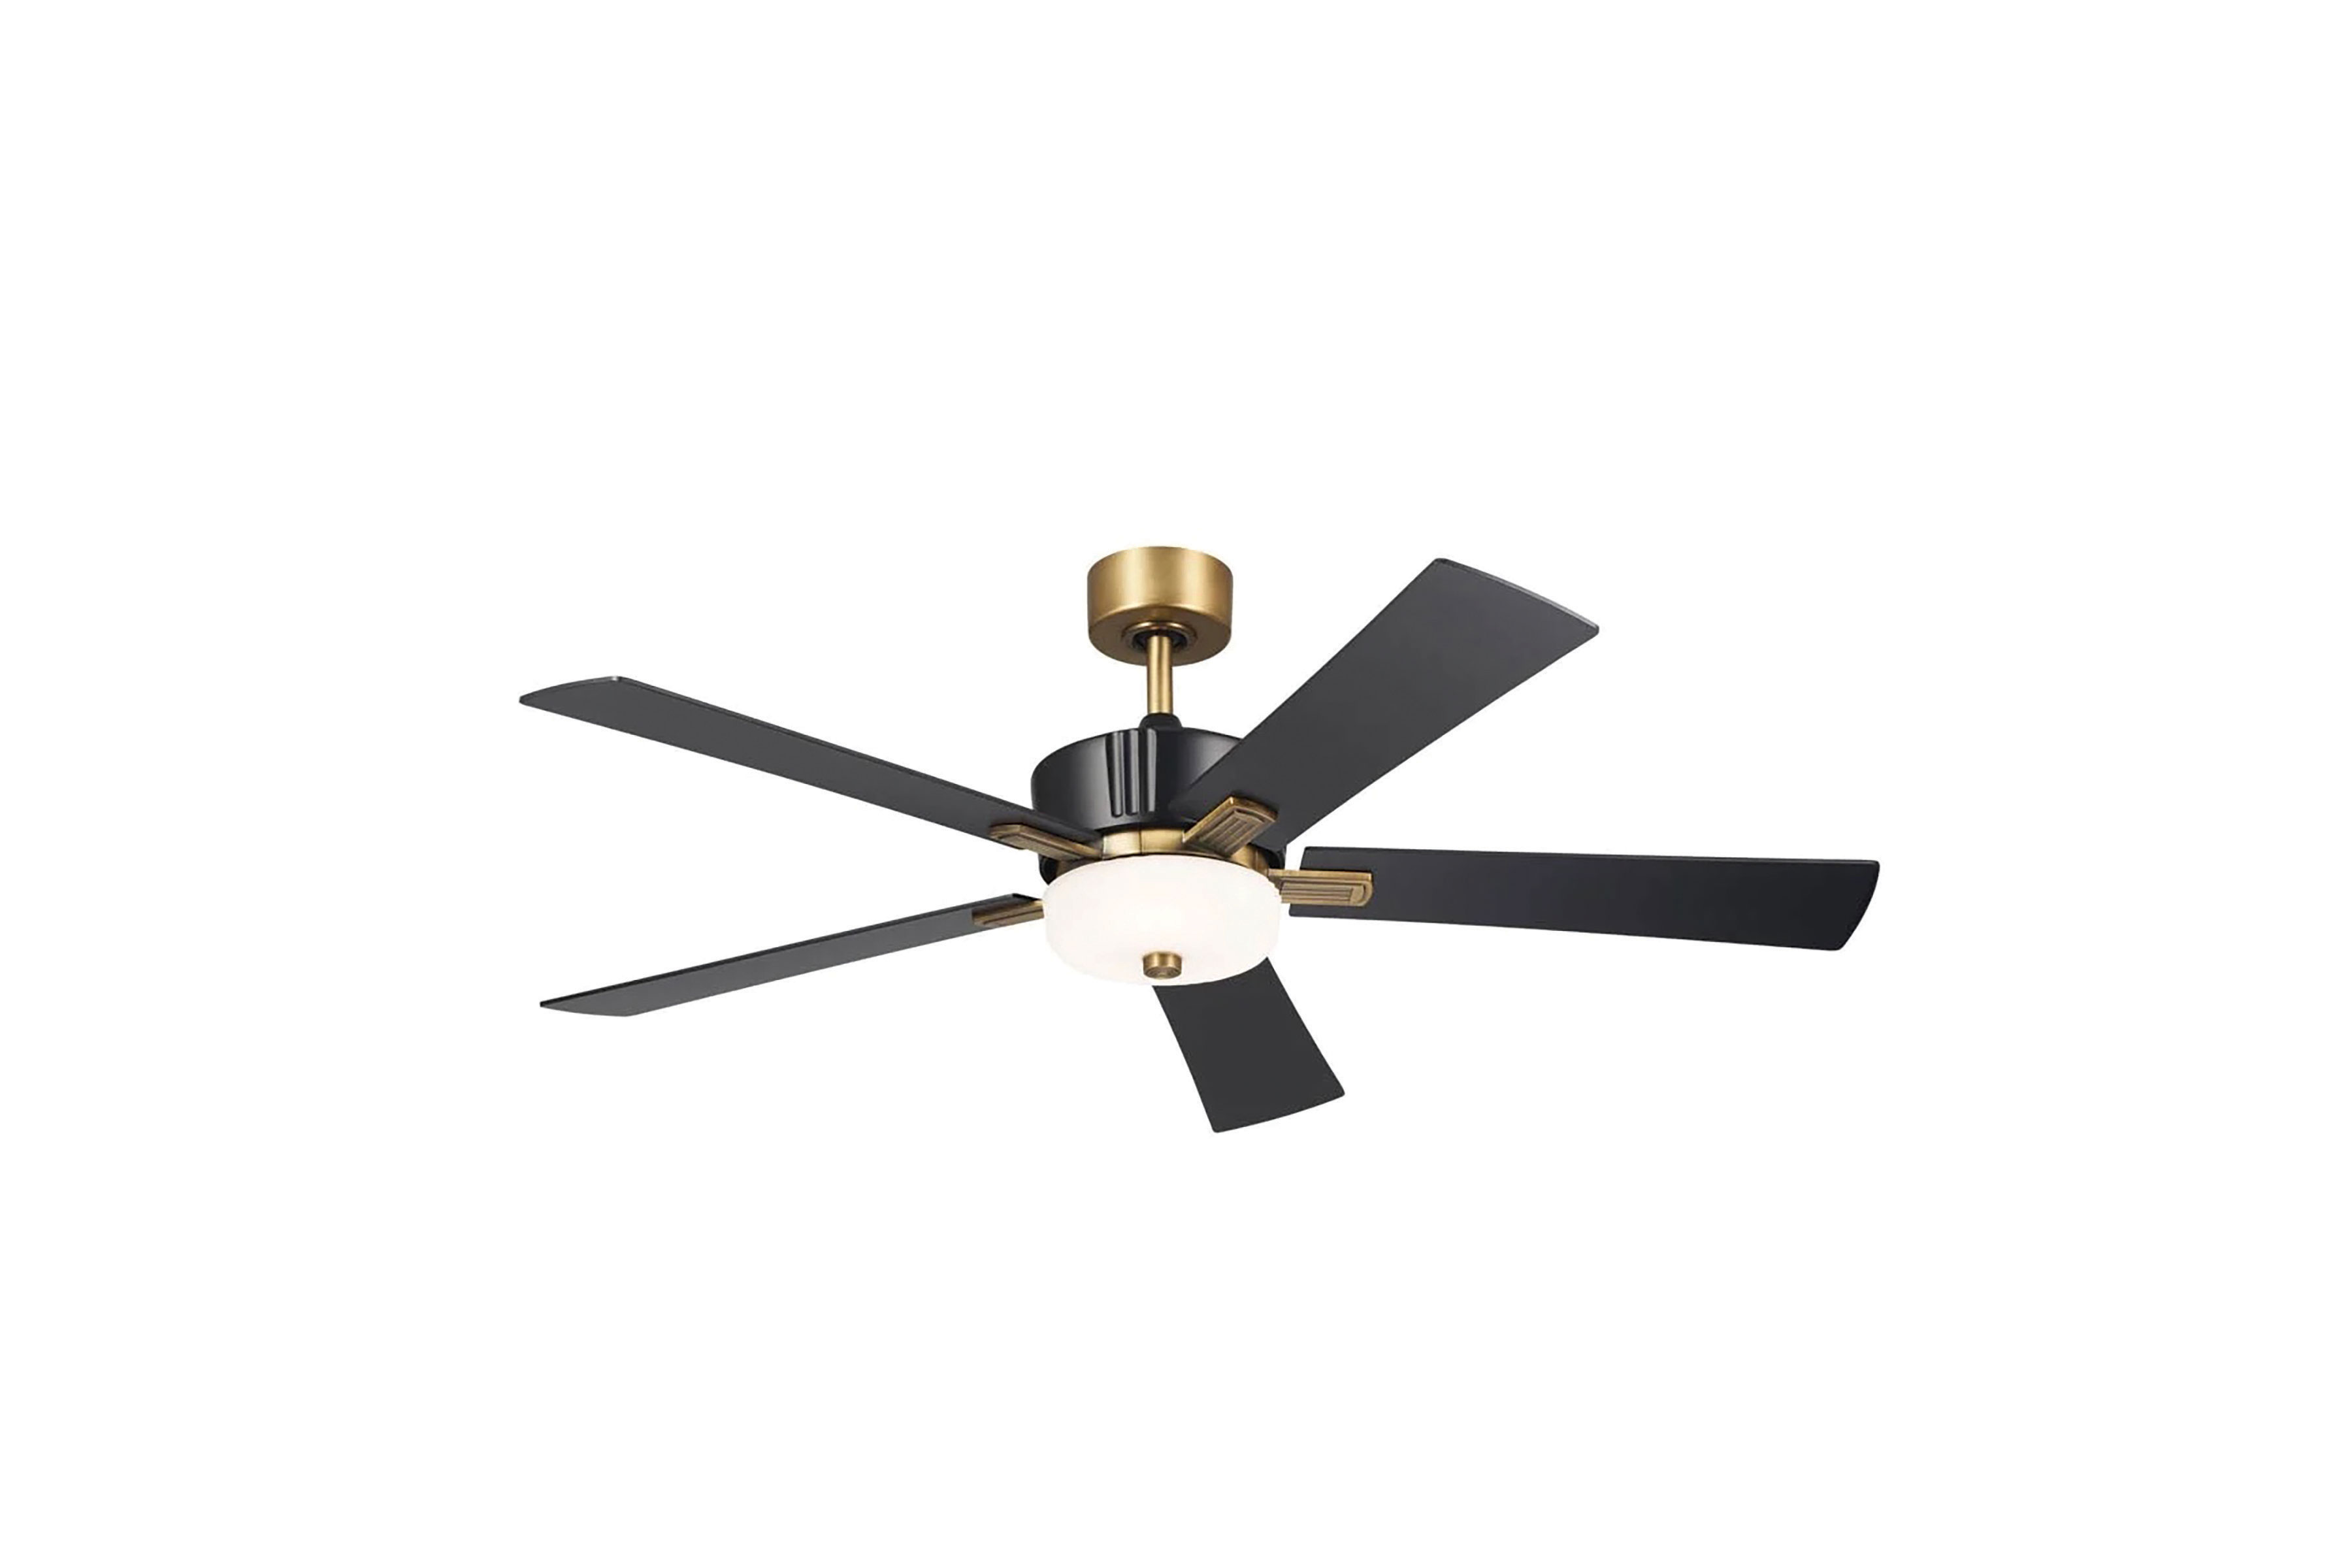 Black and gold ceiling fan. Image by Kichler.